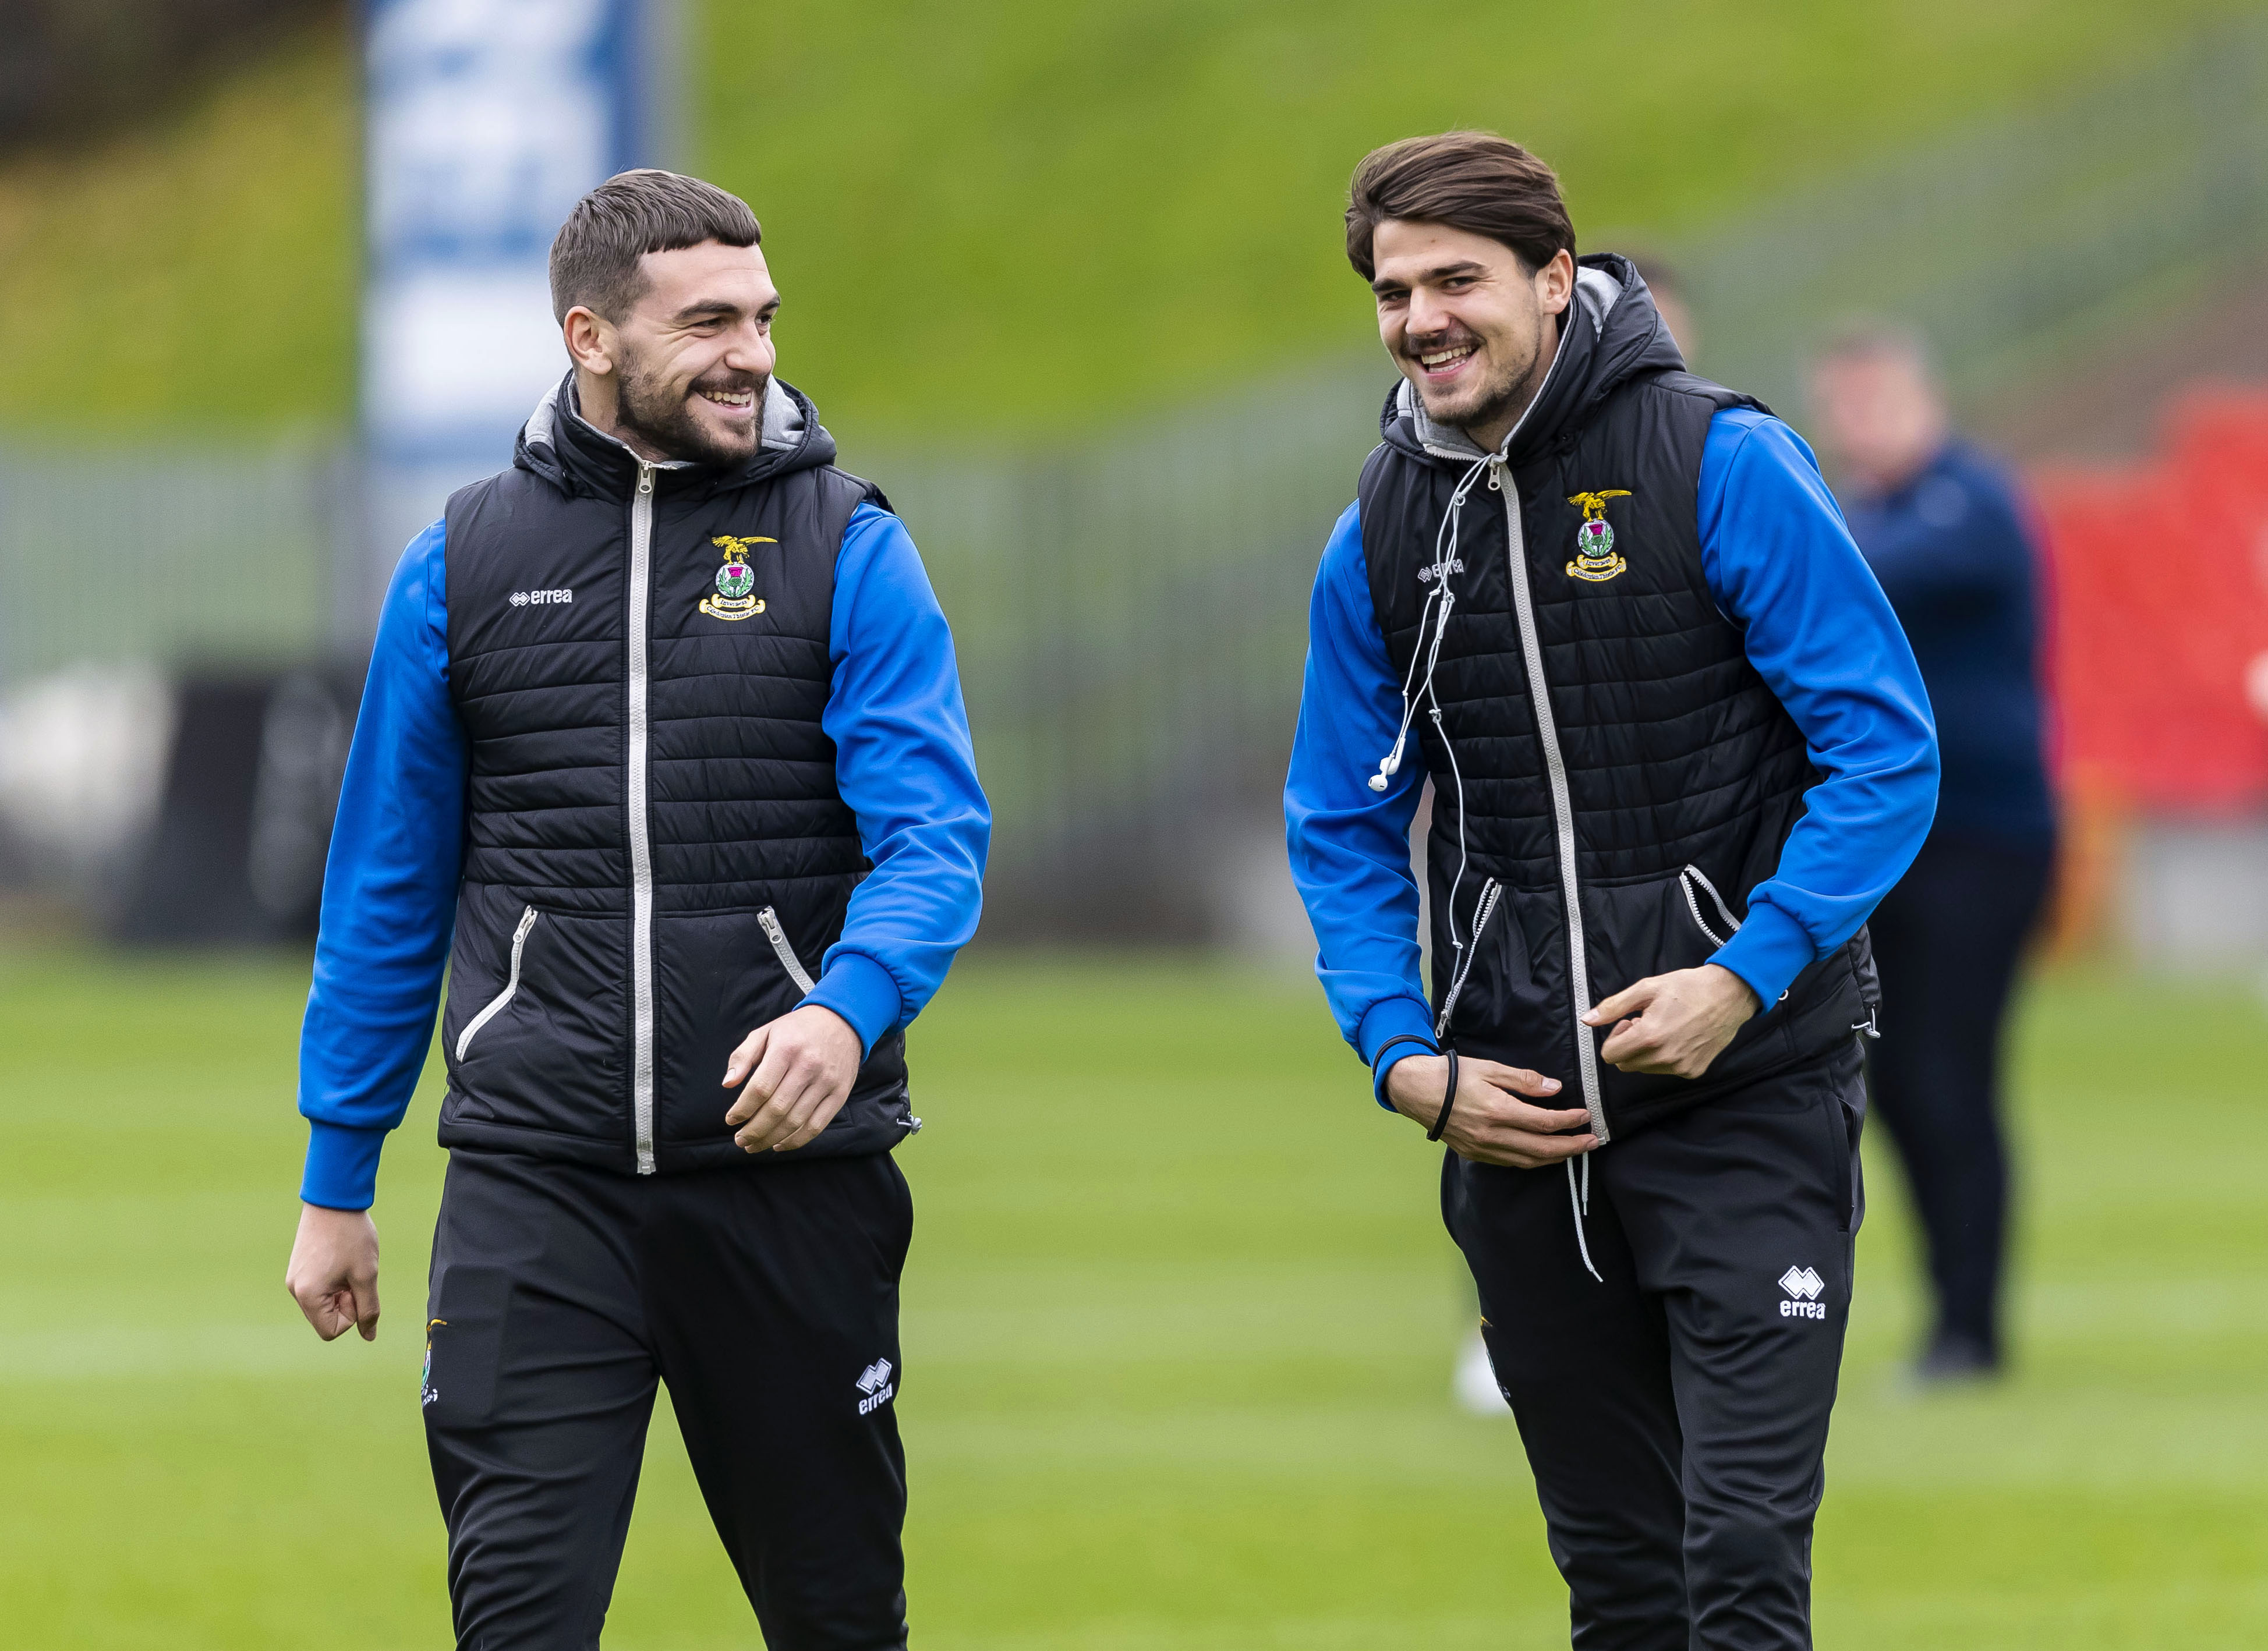 Charlie Trafford (right) wants Caley Thistle to aim for the Championship summit.